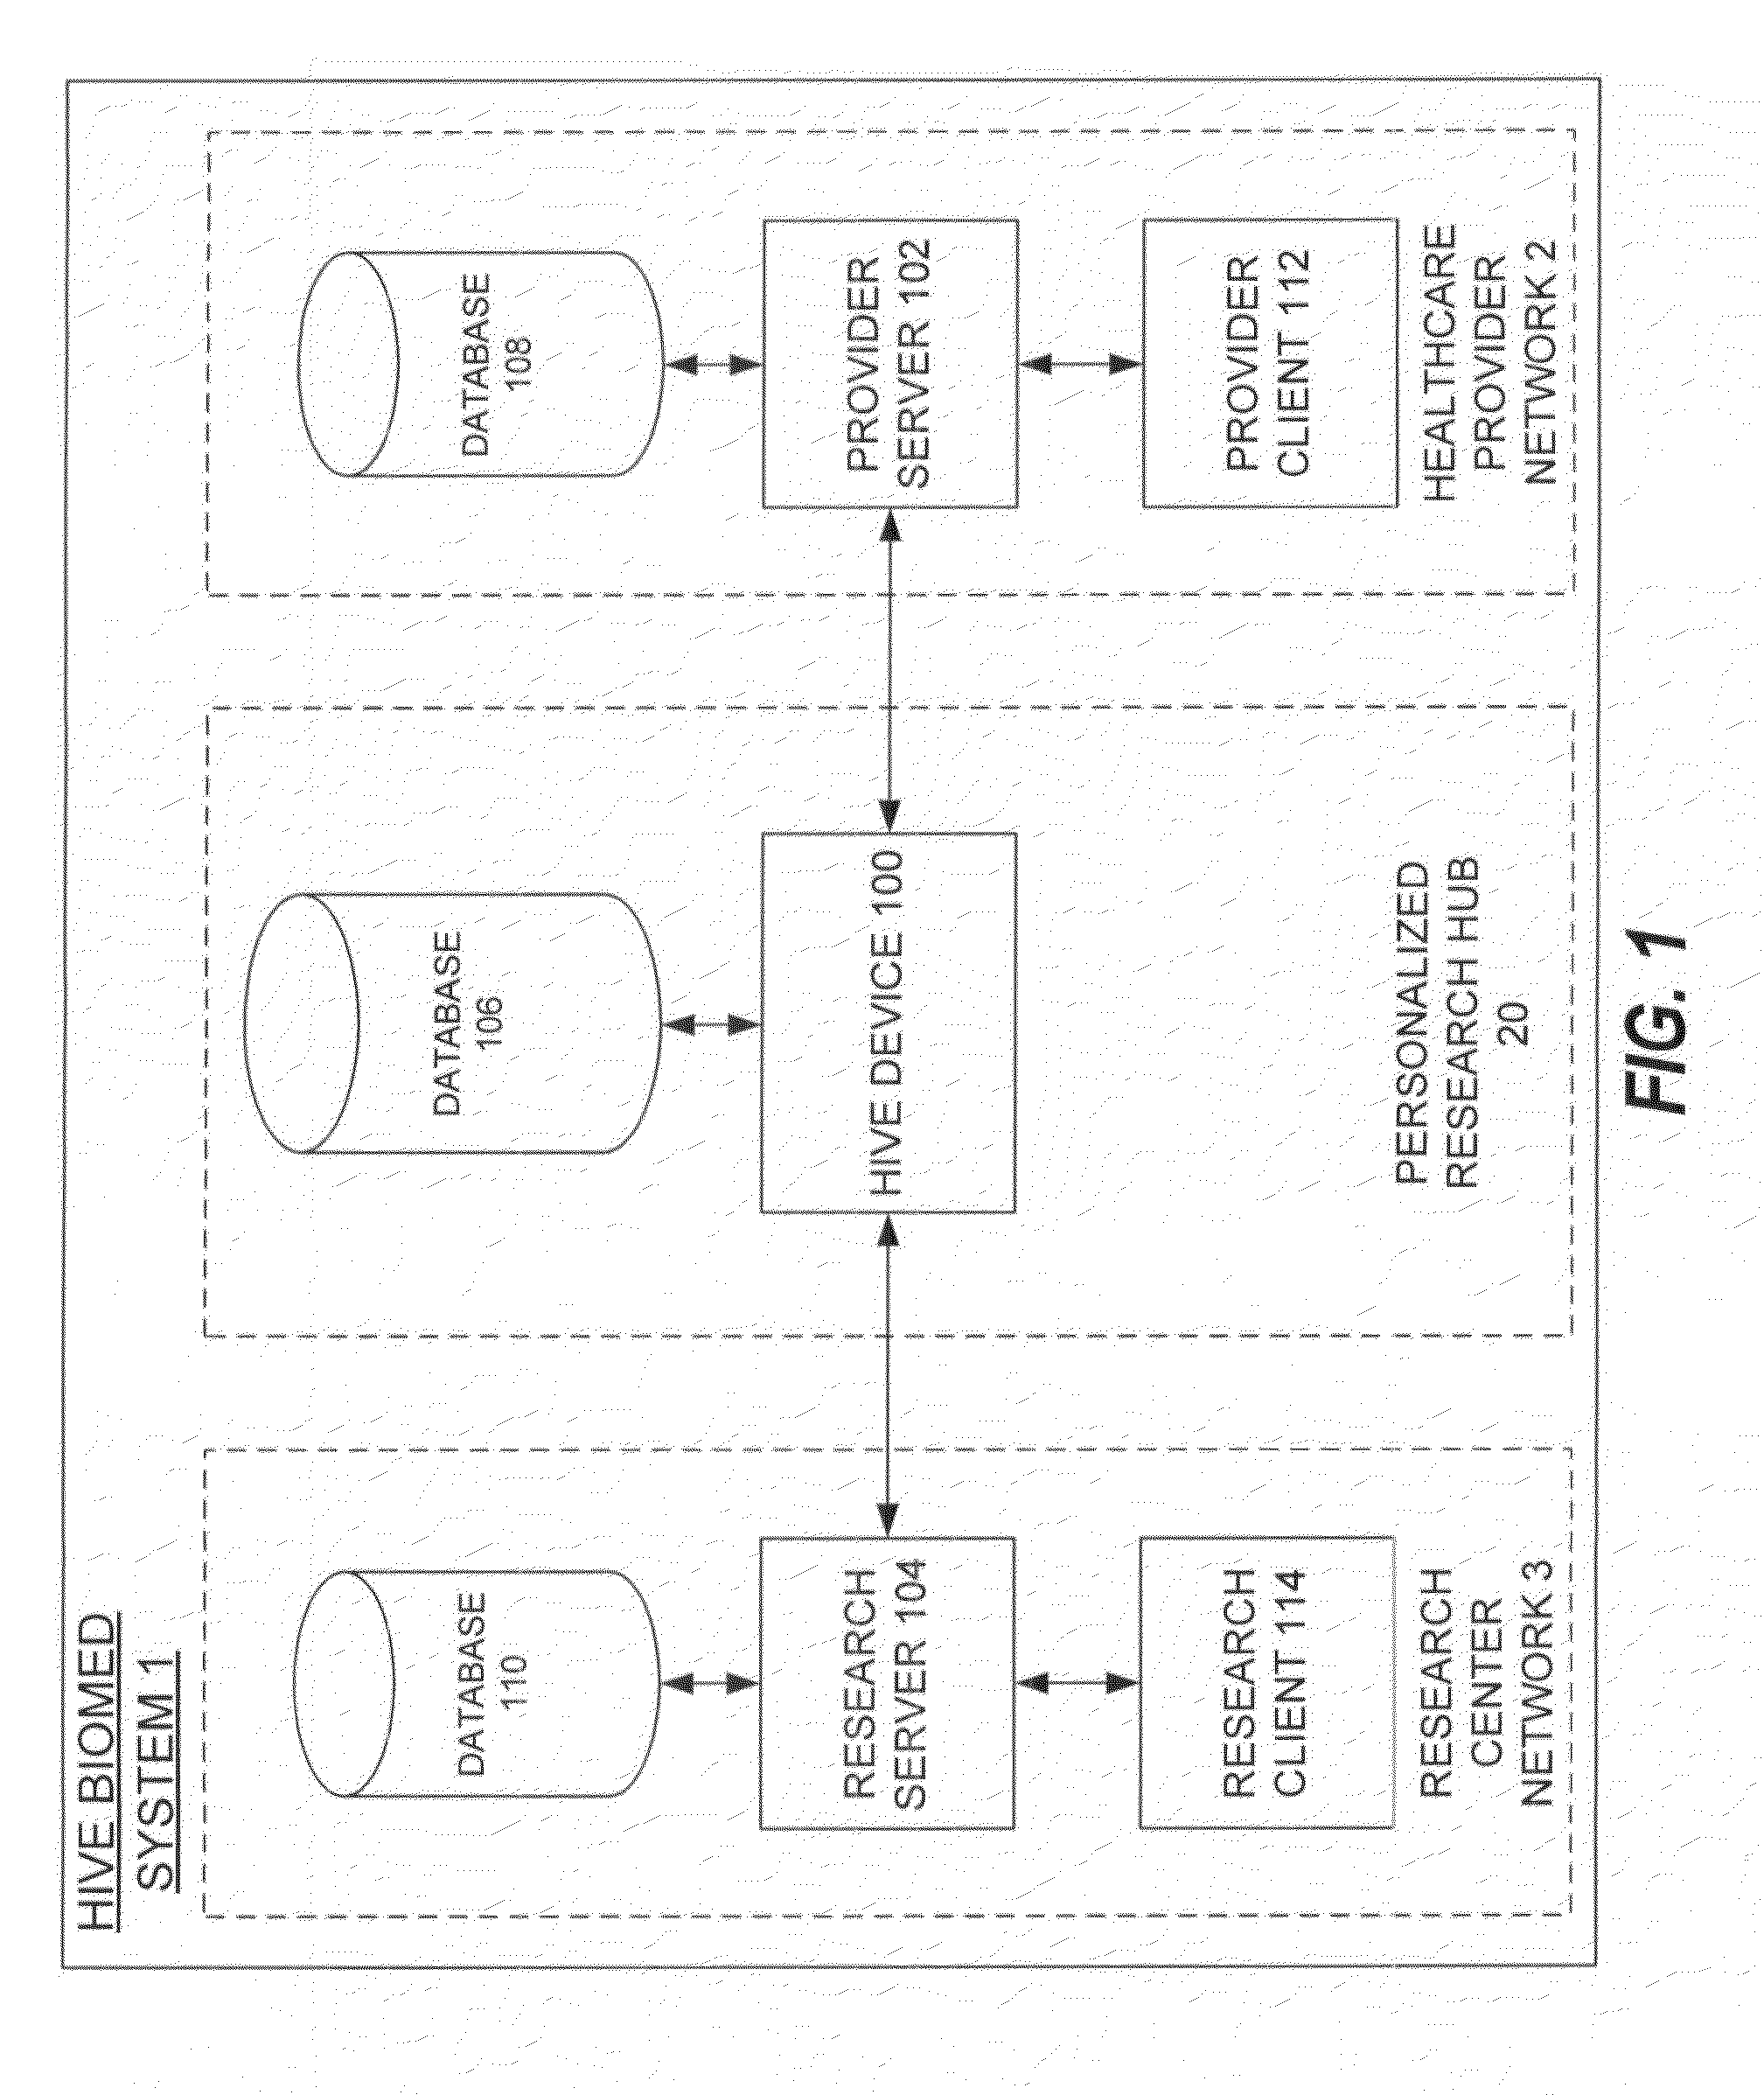 System and method for personalized biomedical information research analytics and knowledge discovery